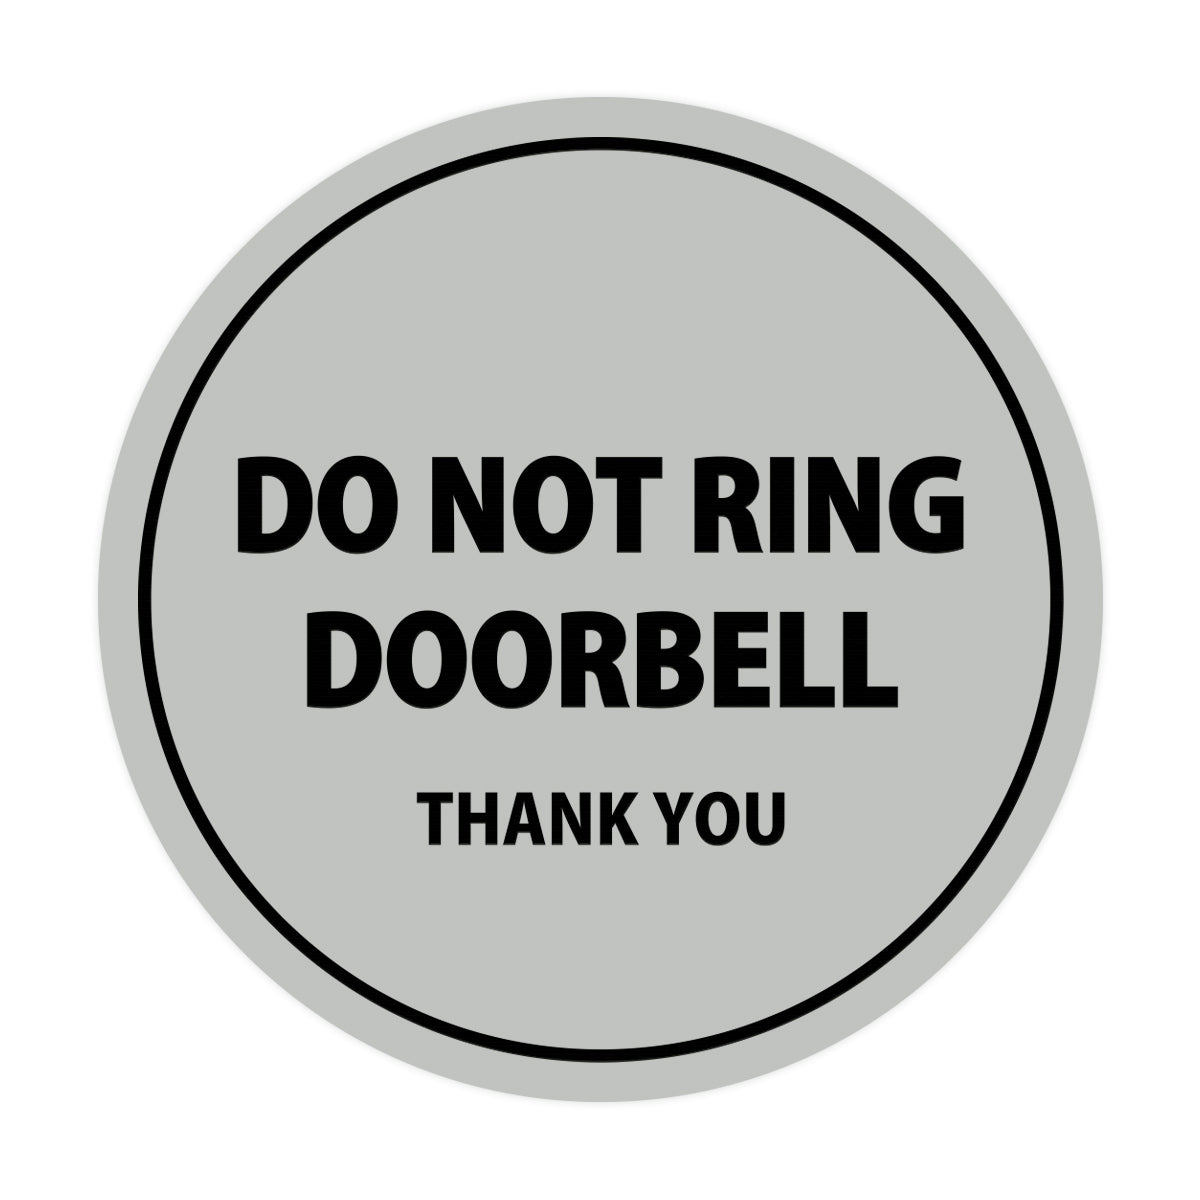 They didn't know I had a RING DOORBELL #barber #barbershop #comedy | TikTok